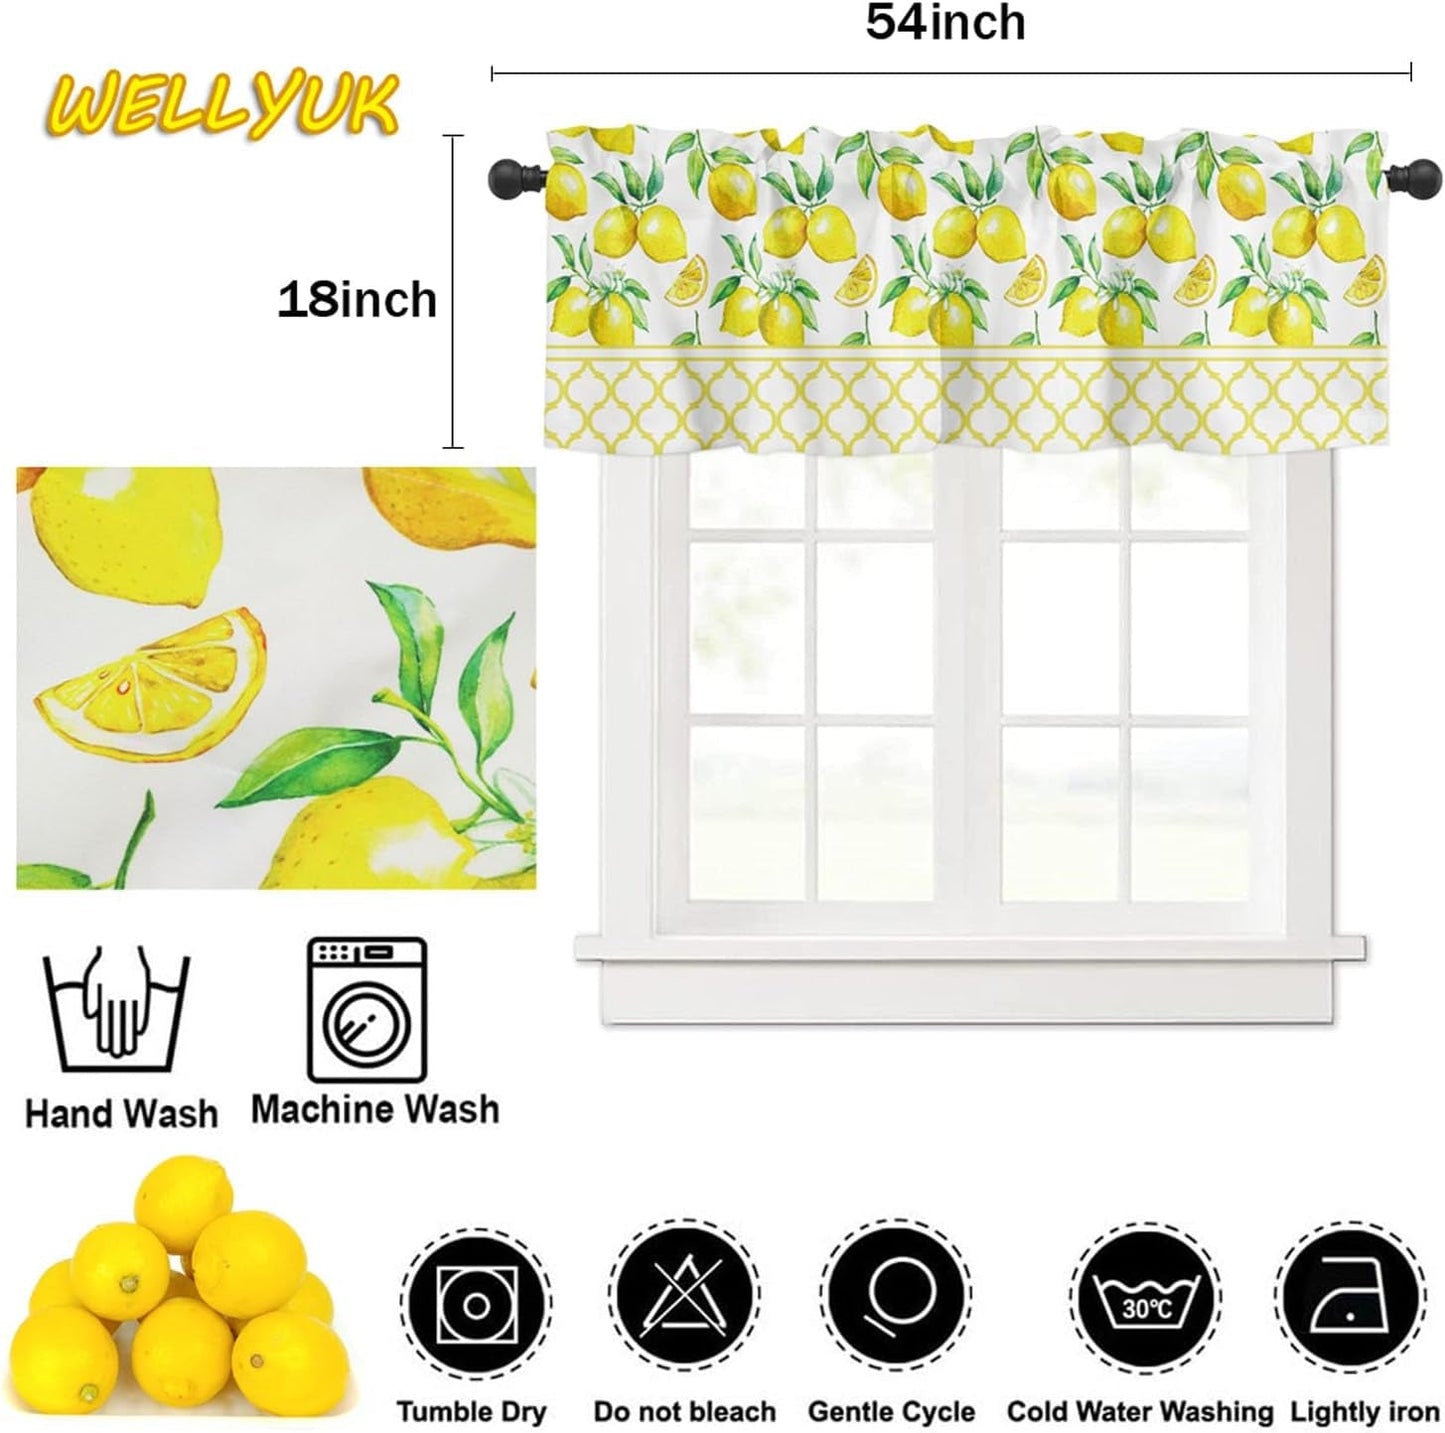 54 Inch X 18 Inch Curtain Valance for Windows, Lemon Fruits Pattern Kitchen Living Room Bedroom Window Treatment with Rod Pocket, Yellow